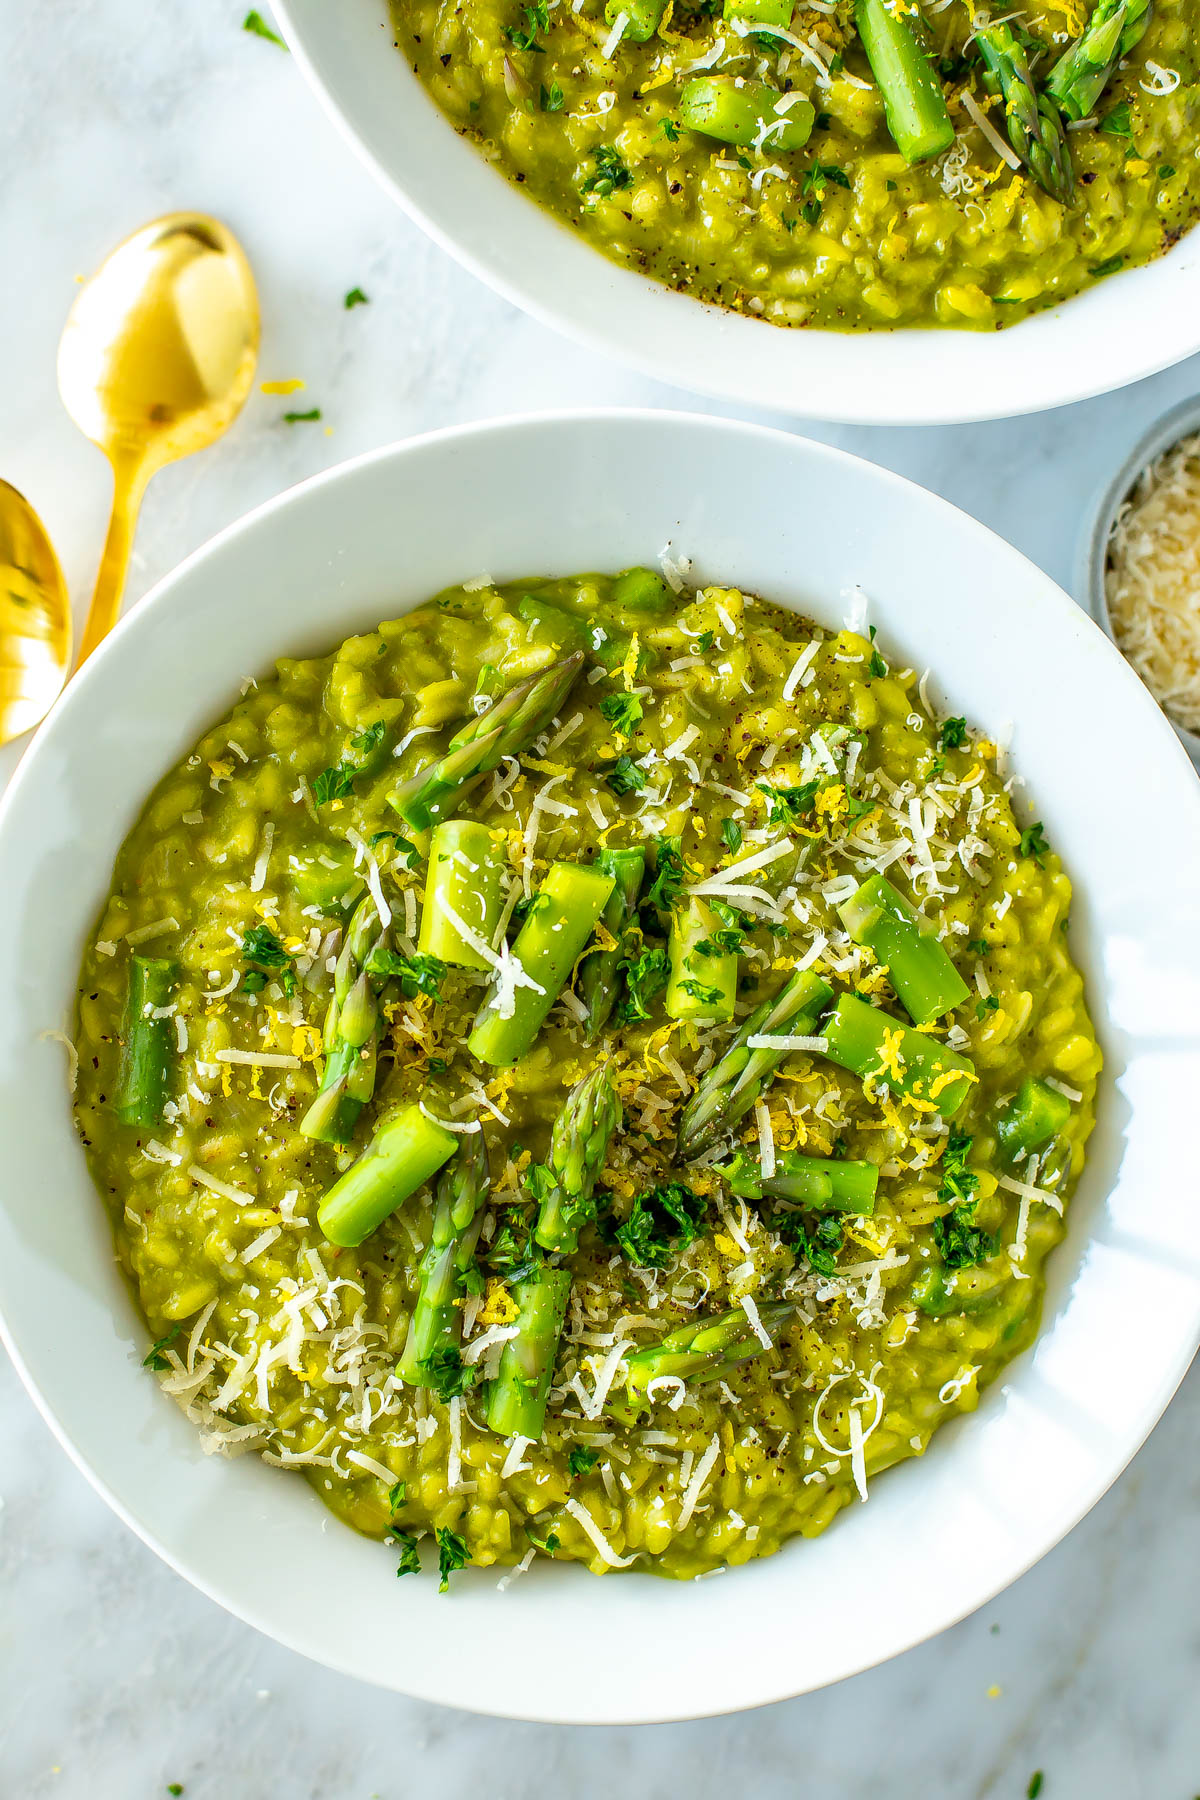 A close-up of a bowl of asparagus risotto.